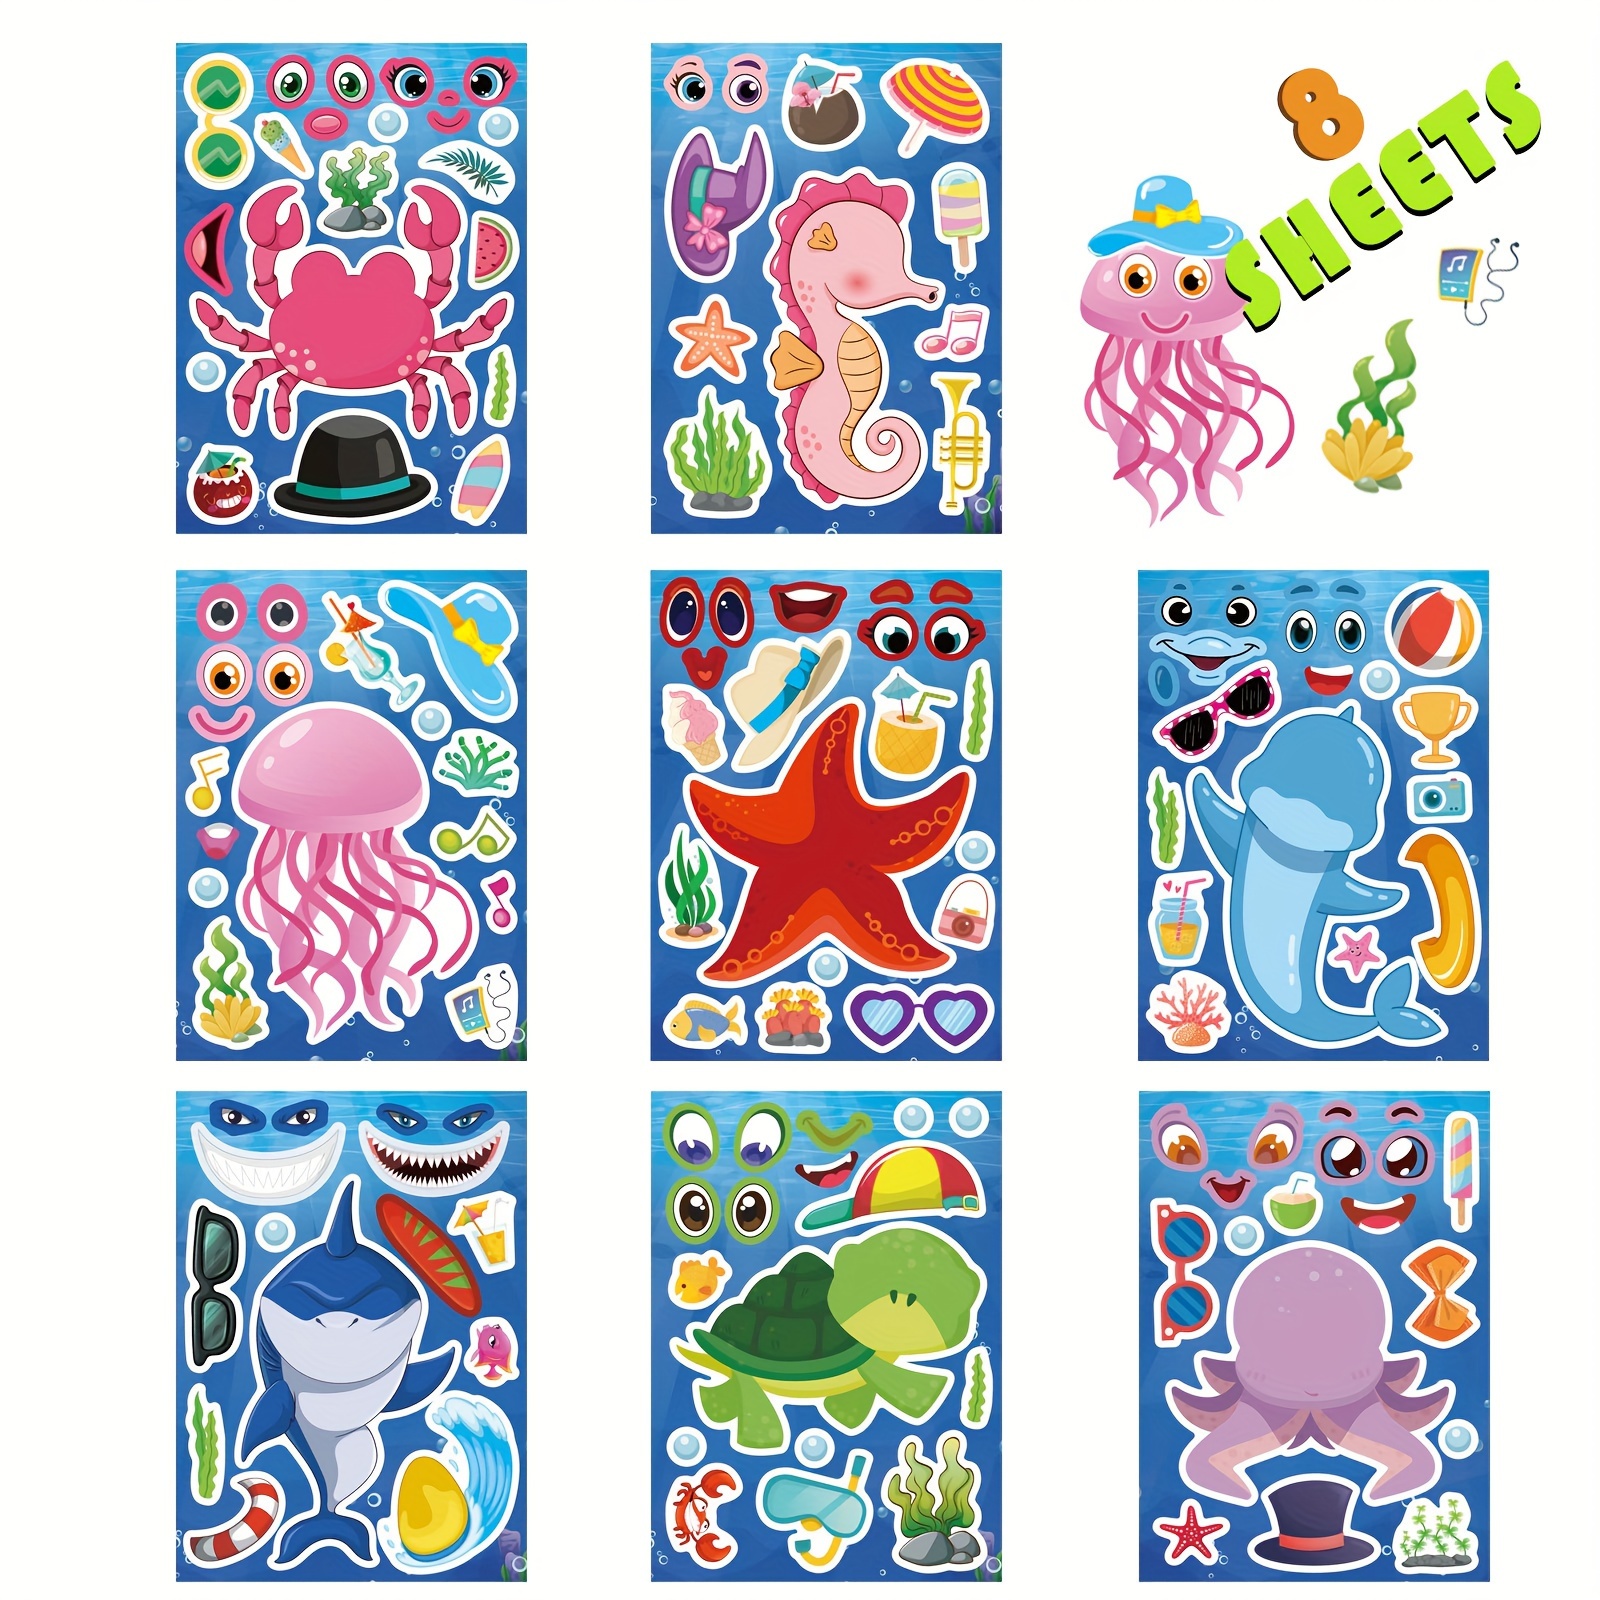 

8pcs/24pcs Make A Face Sea Stickers, Ocean Animals Diy Art Craft Rewards For School Teacher Summer Mermaid Party Favor Stickers For Birthday Gifts Room Ocean Decorated